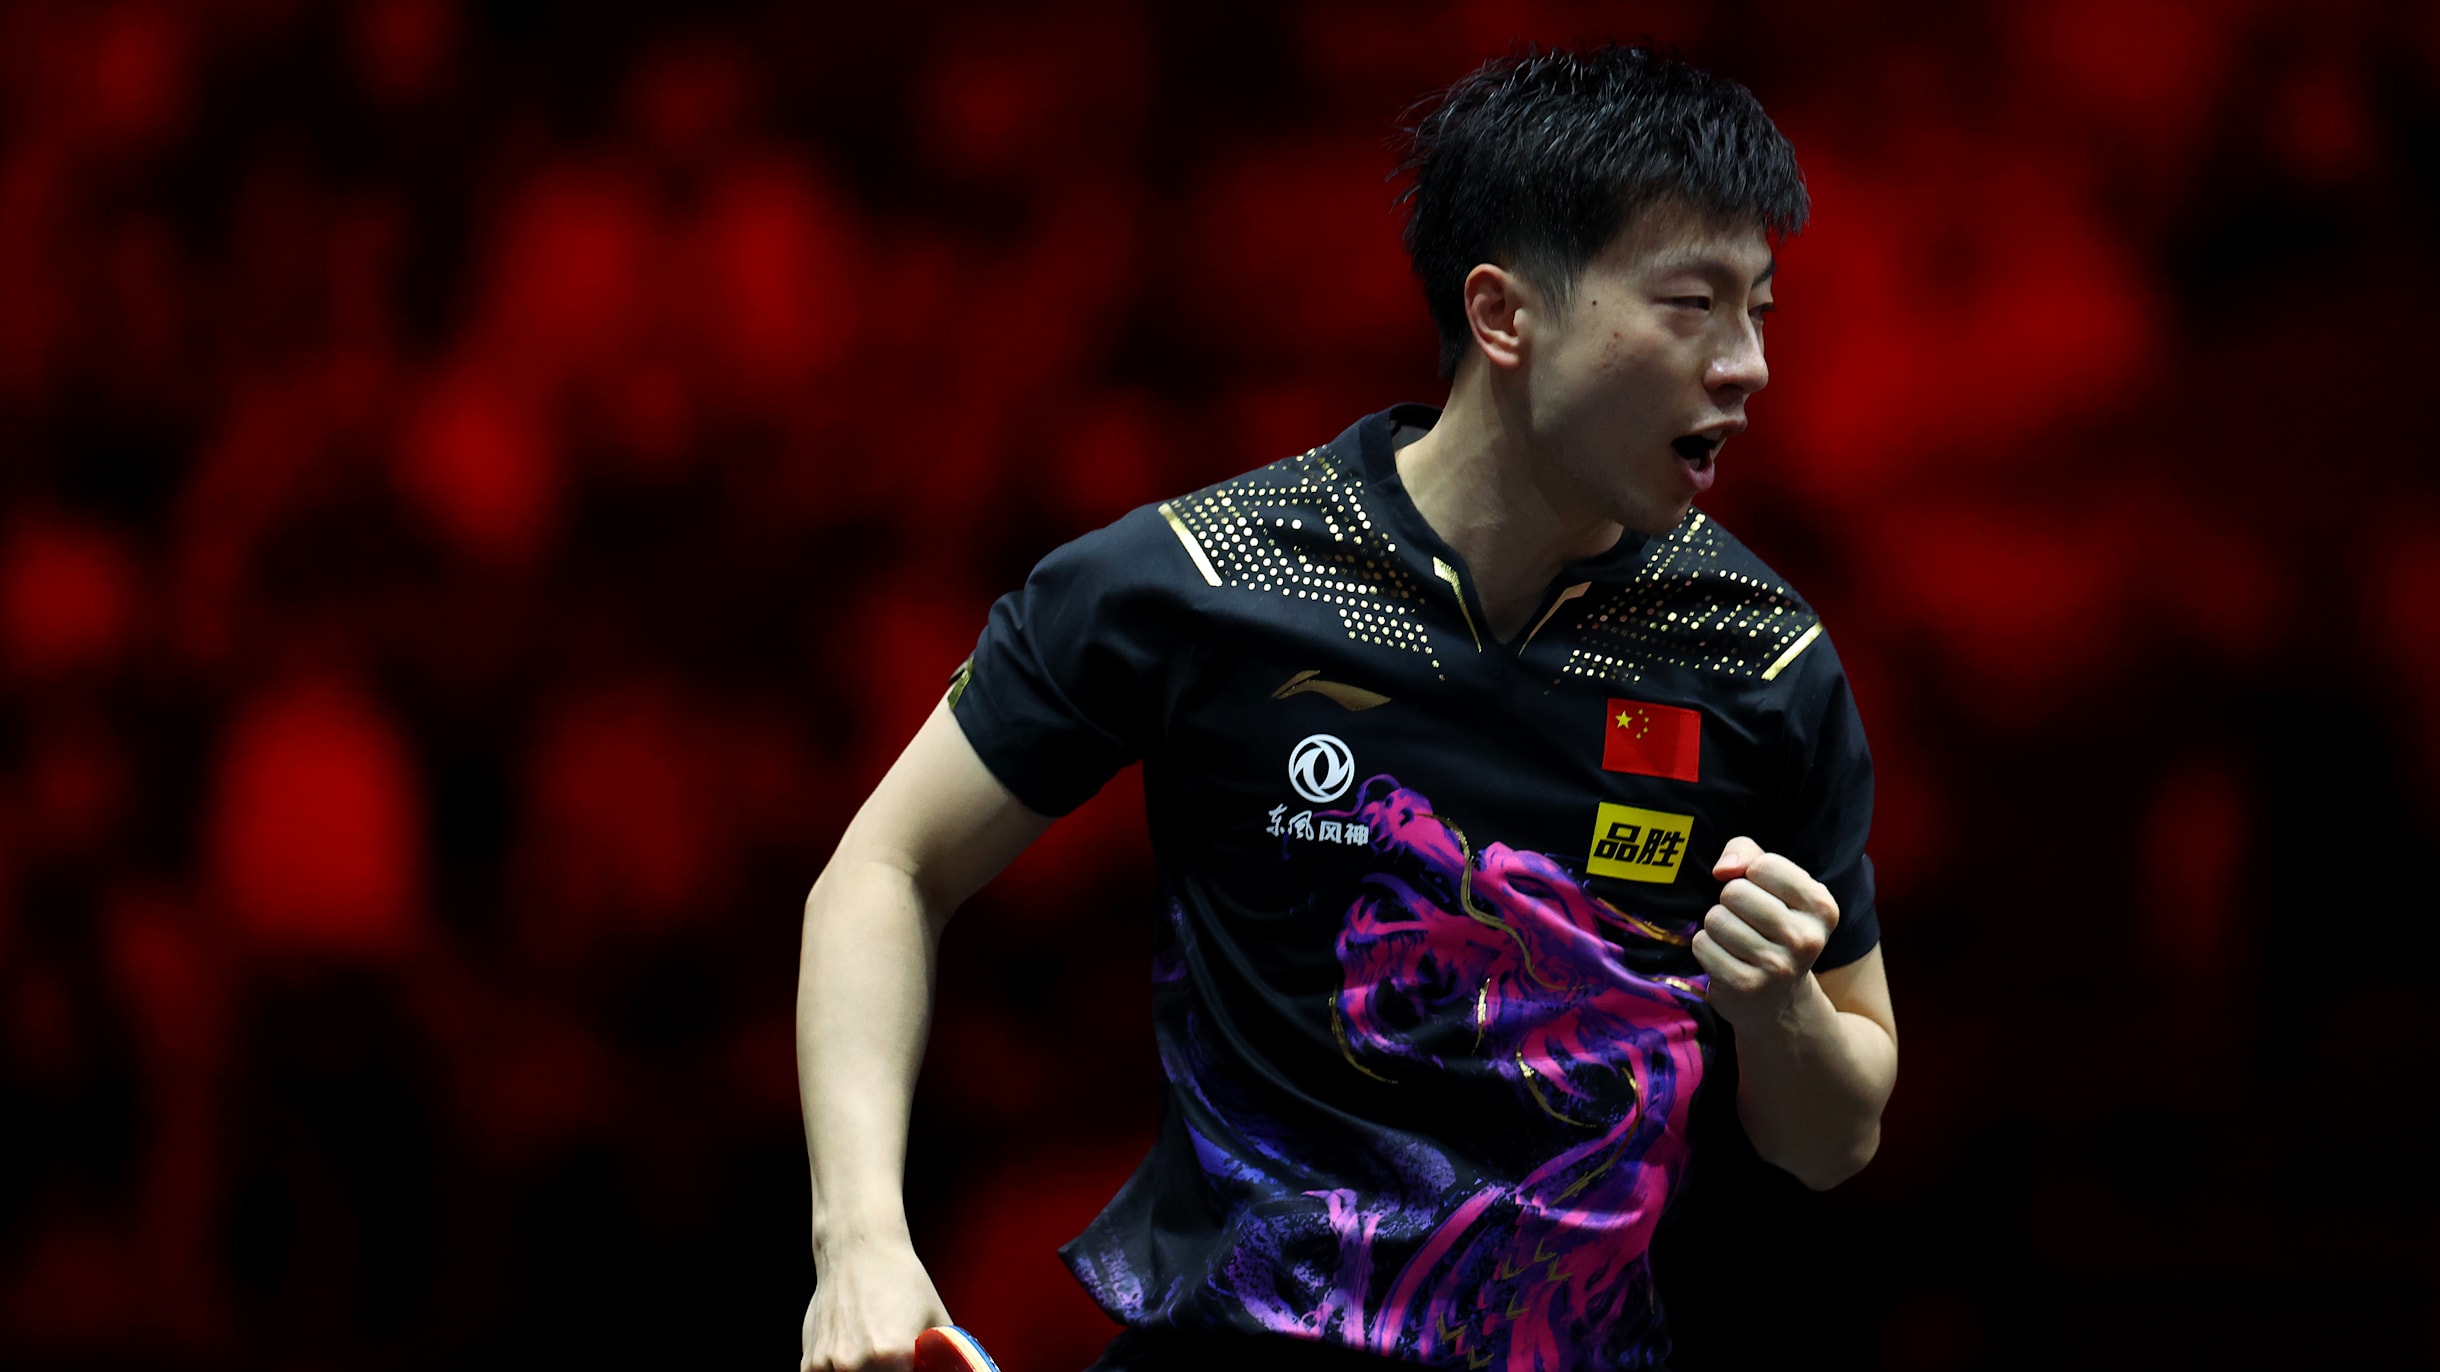 2022 Table Tennis World Championships in Chengdu Preview and how to watch Ma Long, Chen Meng, Fan Zhendong and others